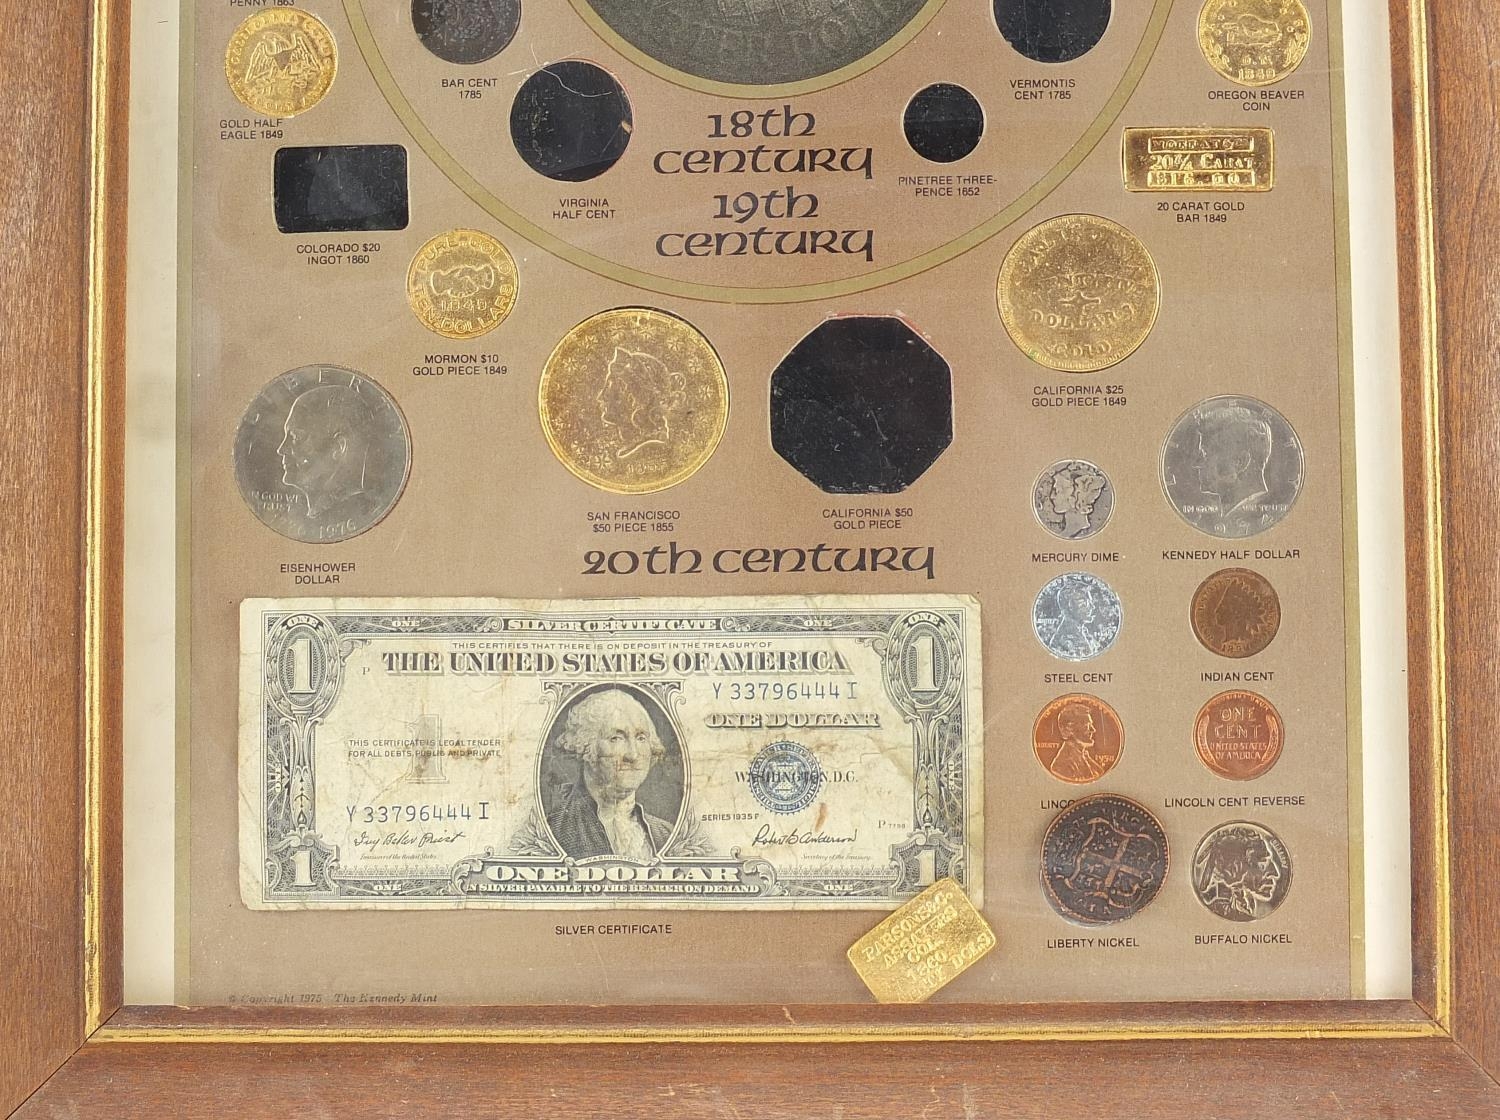 20th century Bicentennial Coin Collection by The Kennedy Mint, framed and glazed, 35cm x 27cm - Image 3 of 4